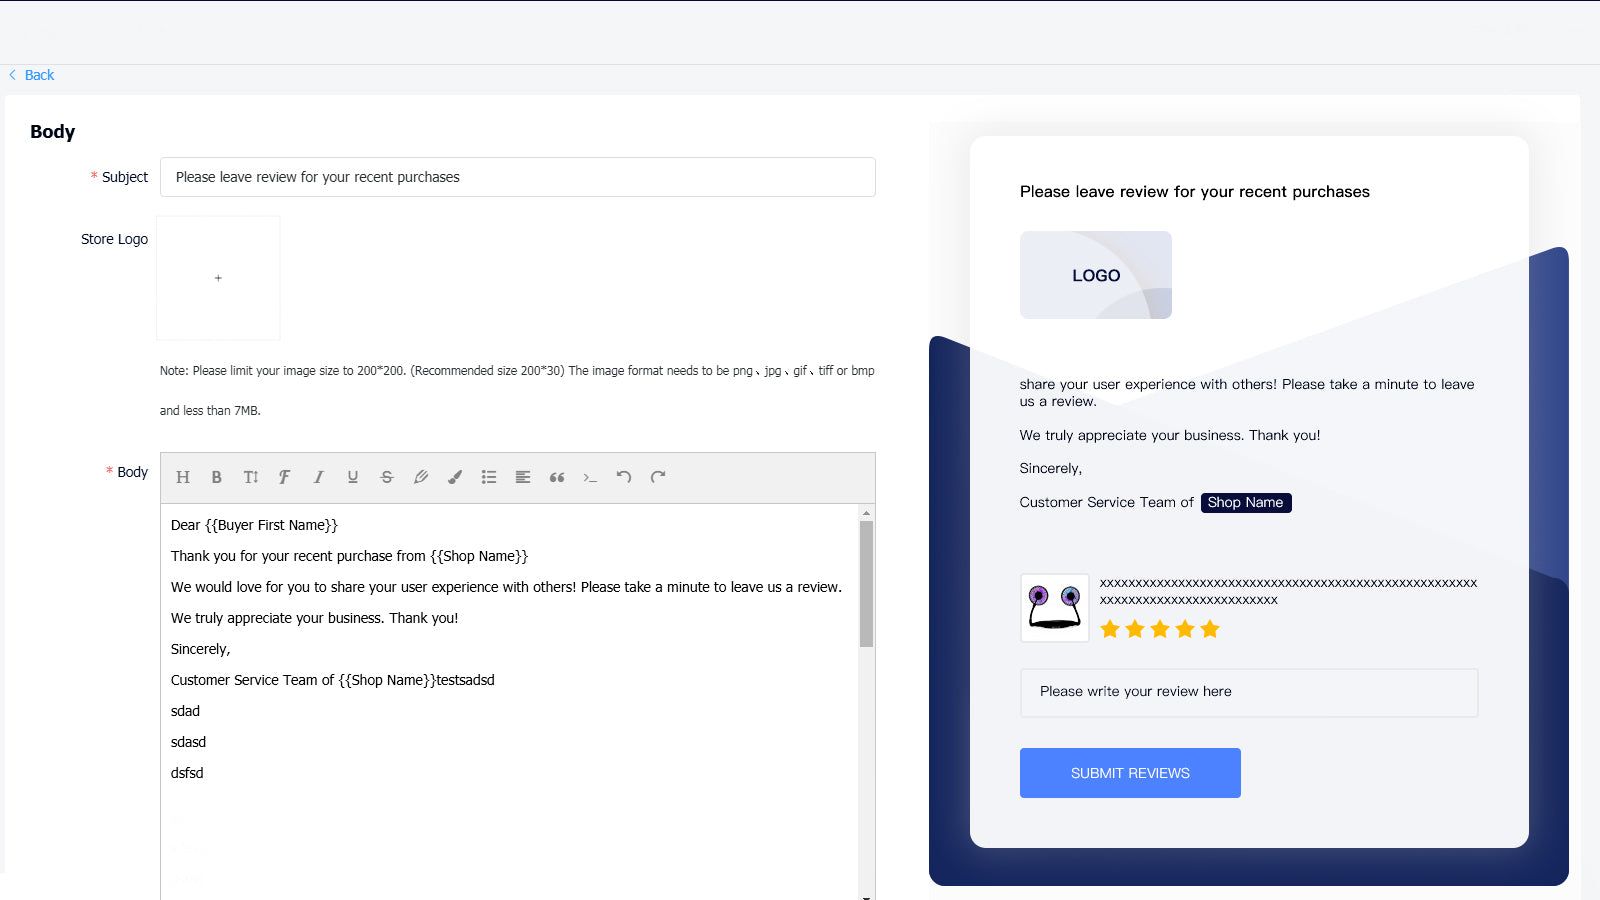 Email customers automatically and ask them to leave reviews